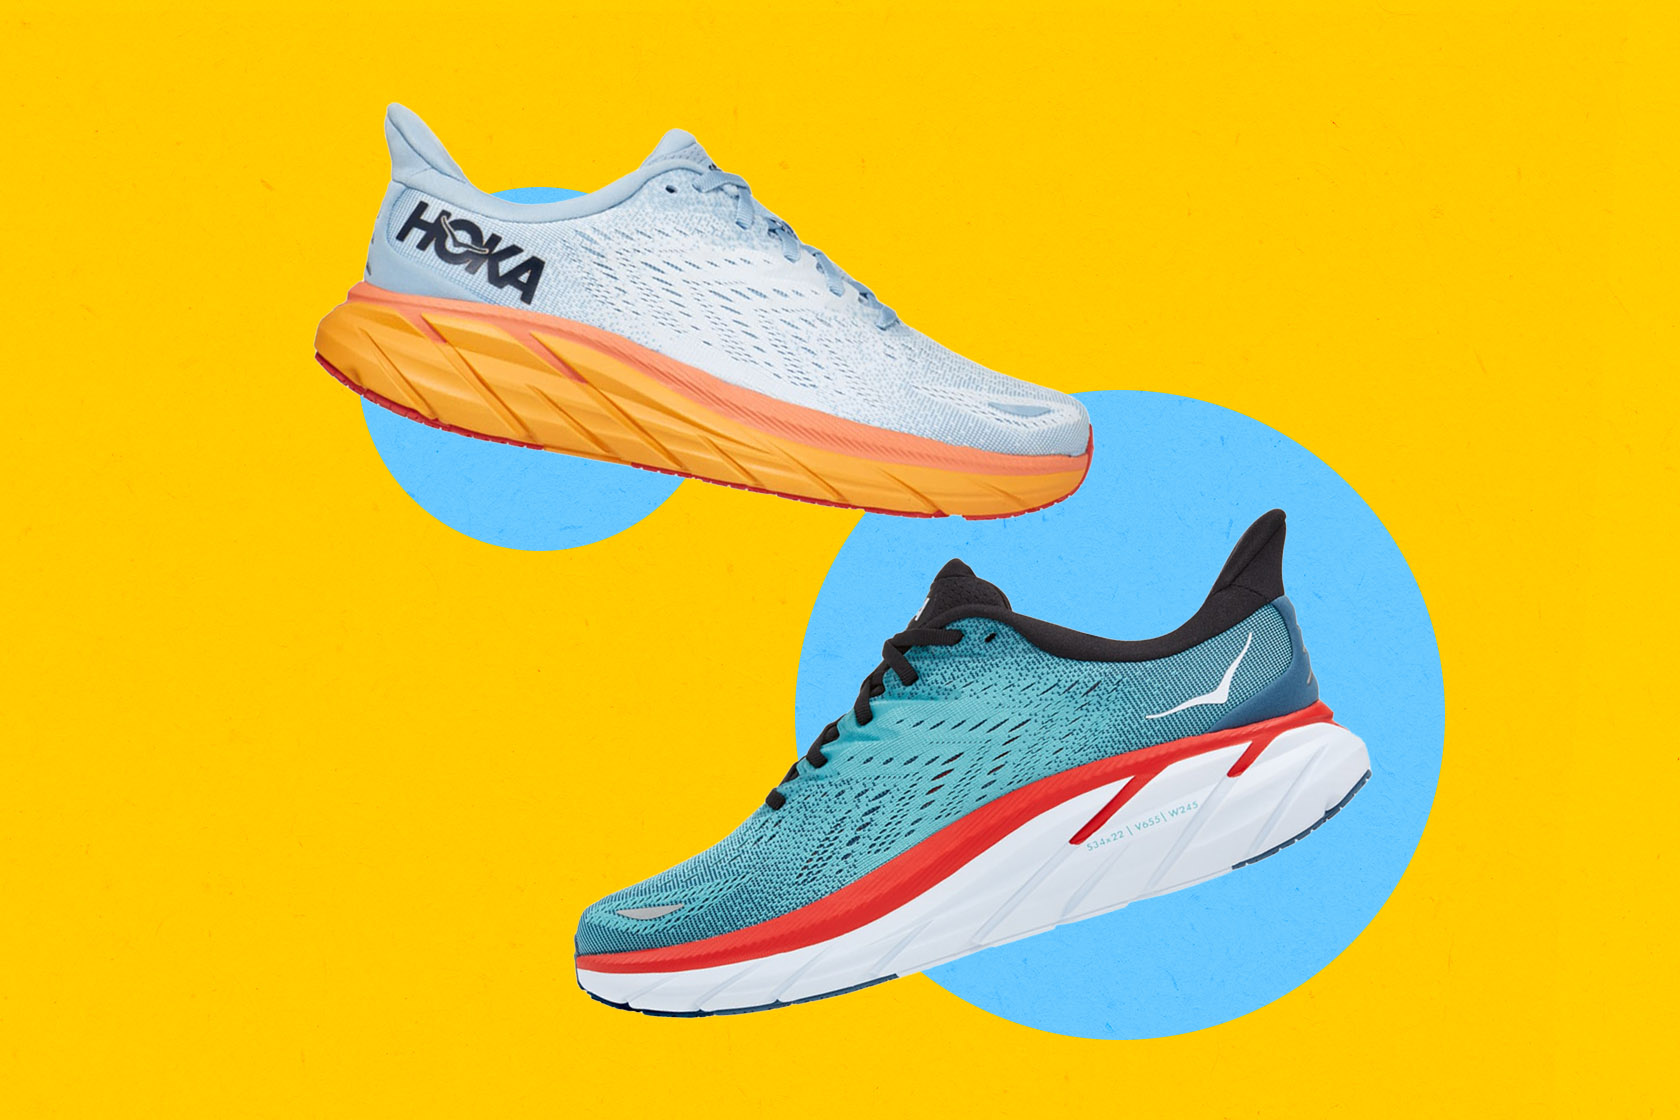 HOKA Clifton 8 shoes are 20% off in a ton of popular colors